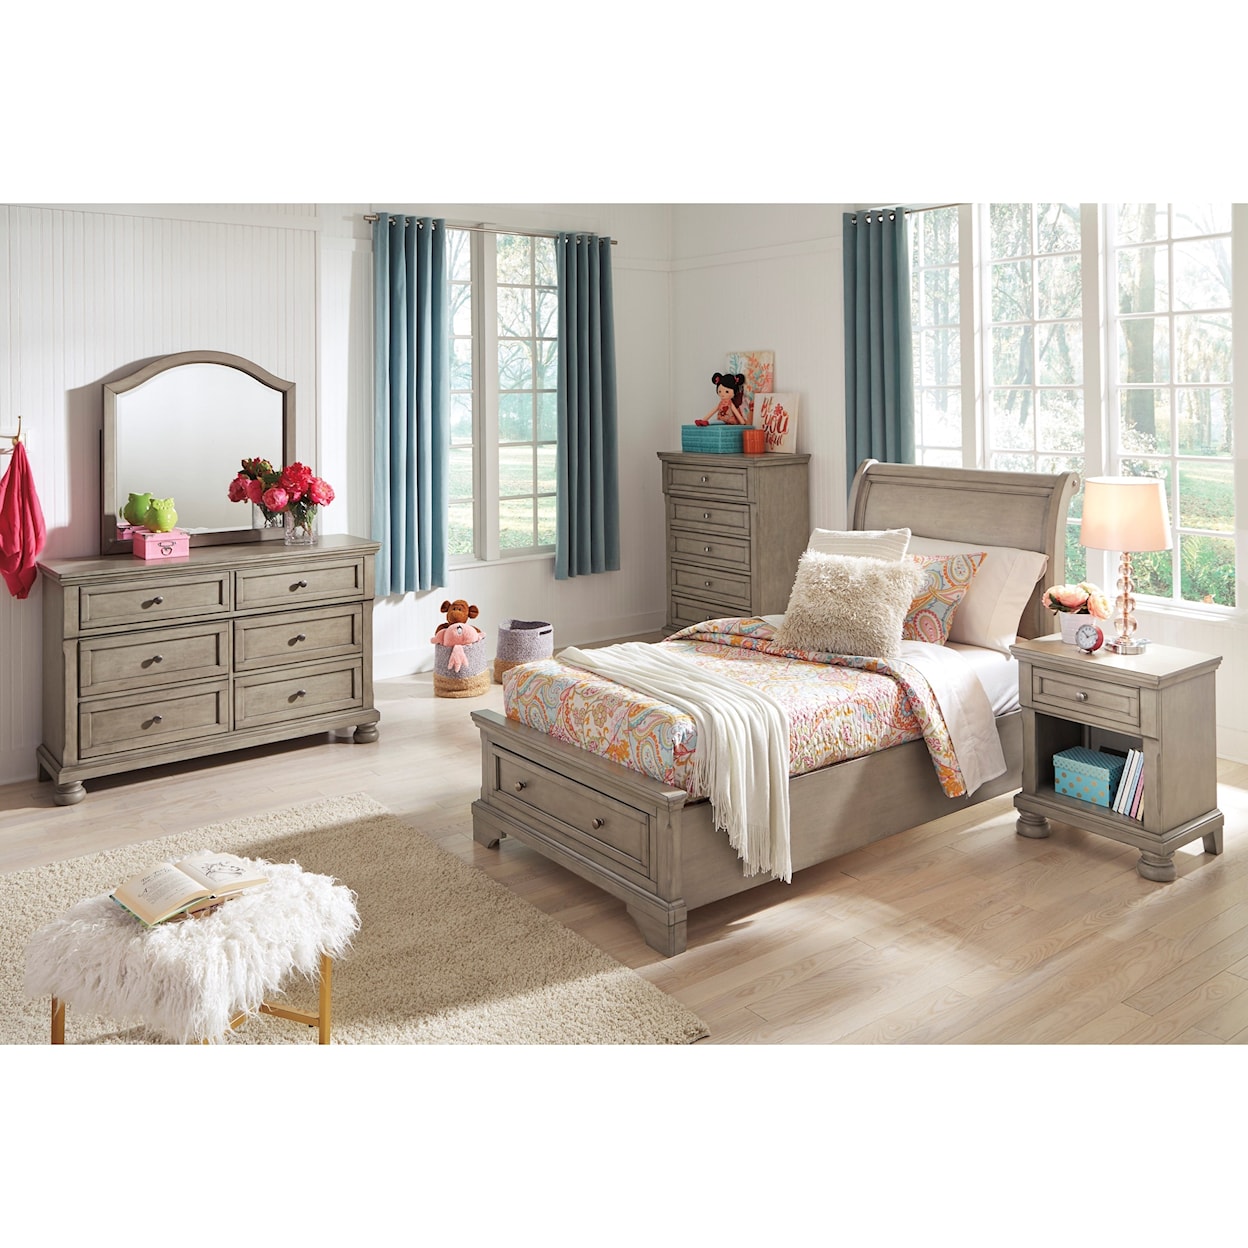 Signature Design by Ashley Lettner Twin Bedroom Group